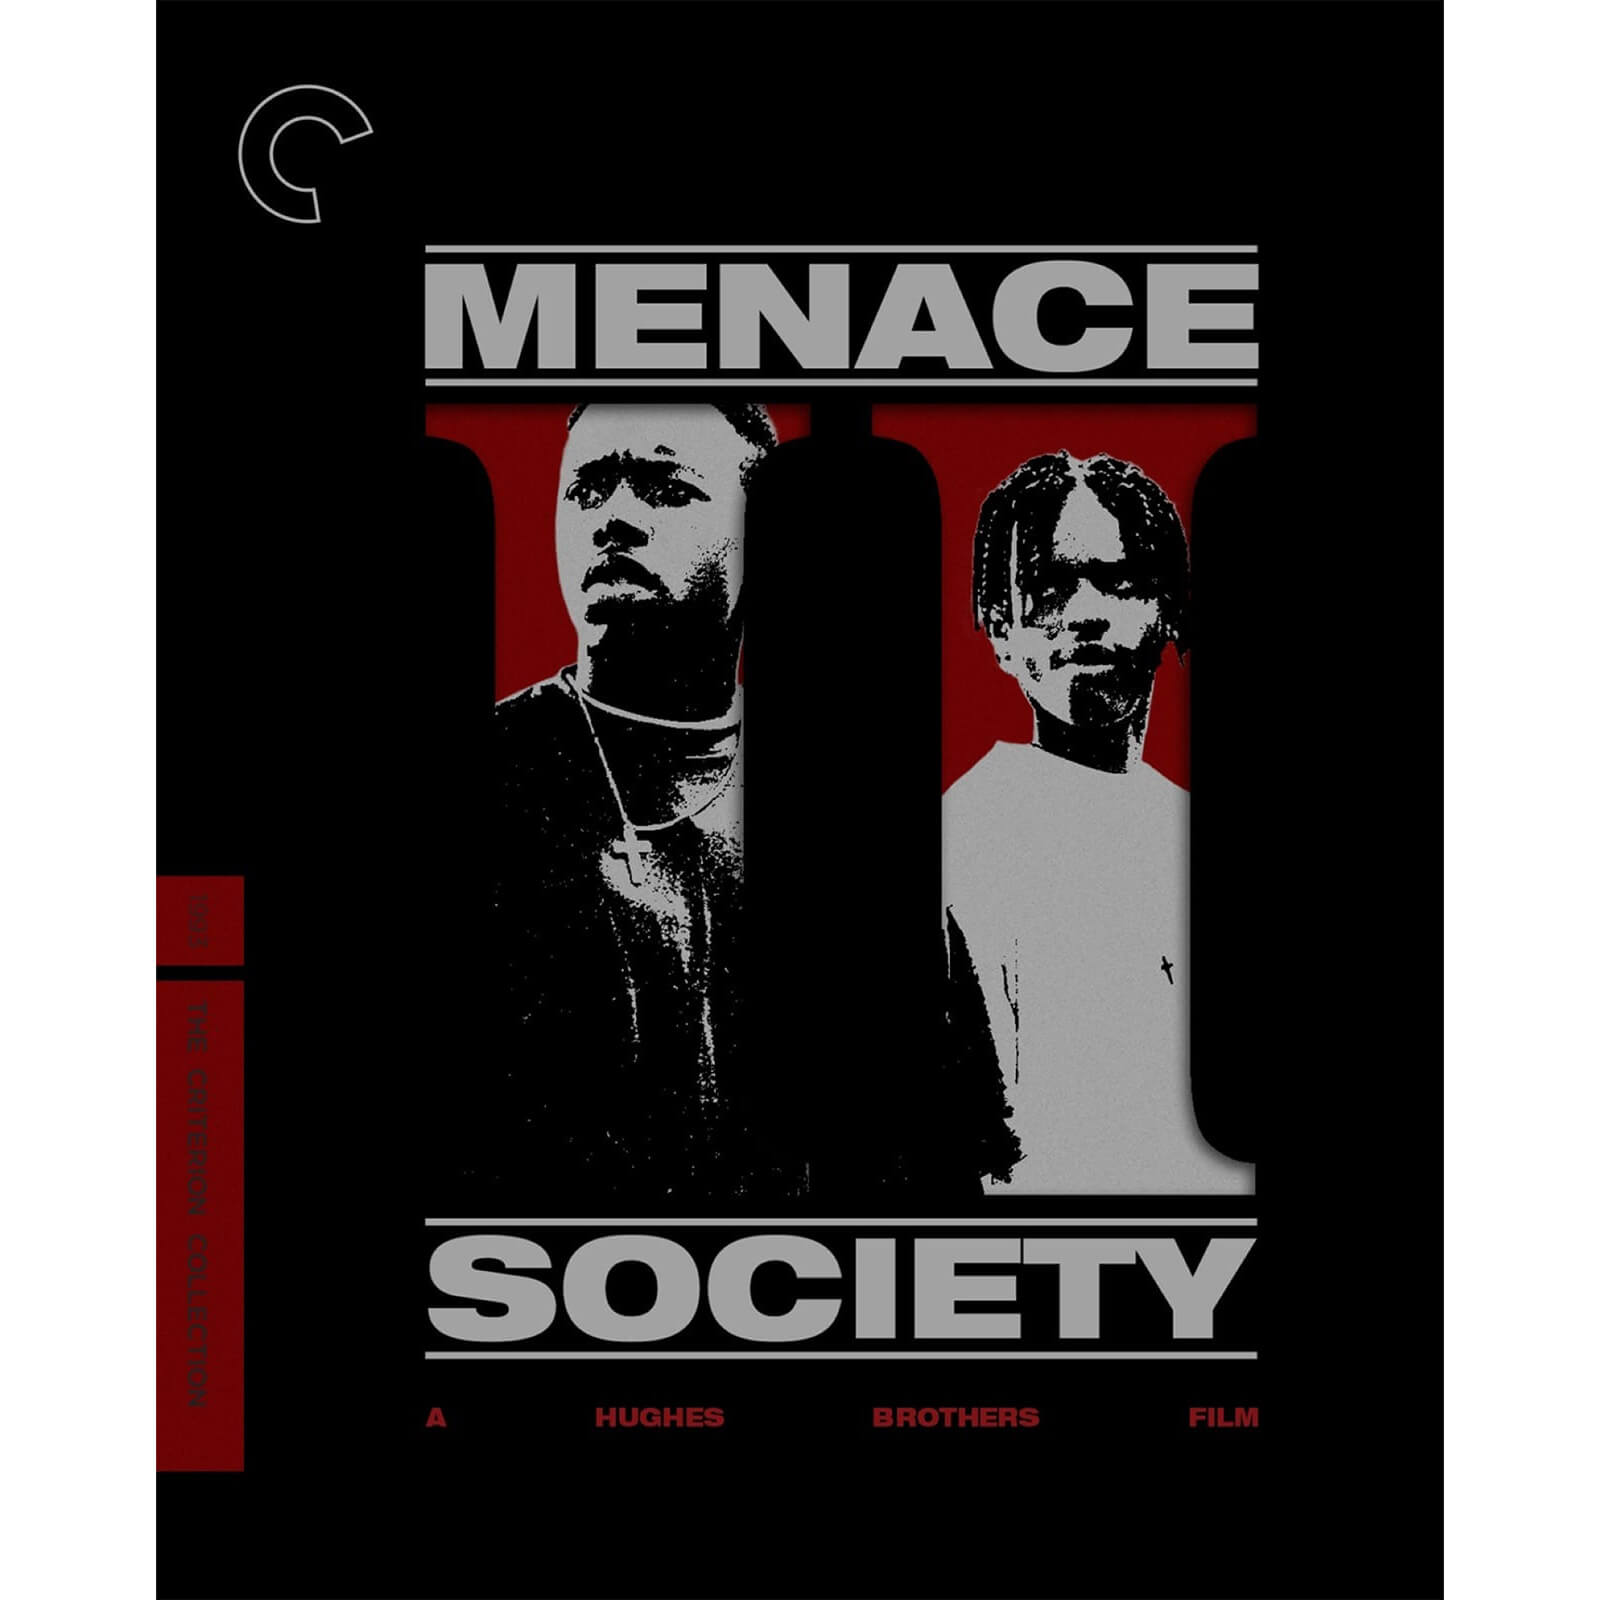 Menace II Society - The Criterion Collection 4K Ultra HD (Includes Blu-ray)